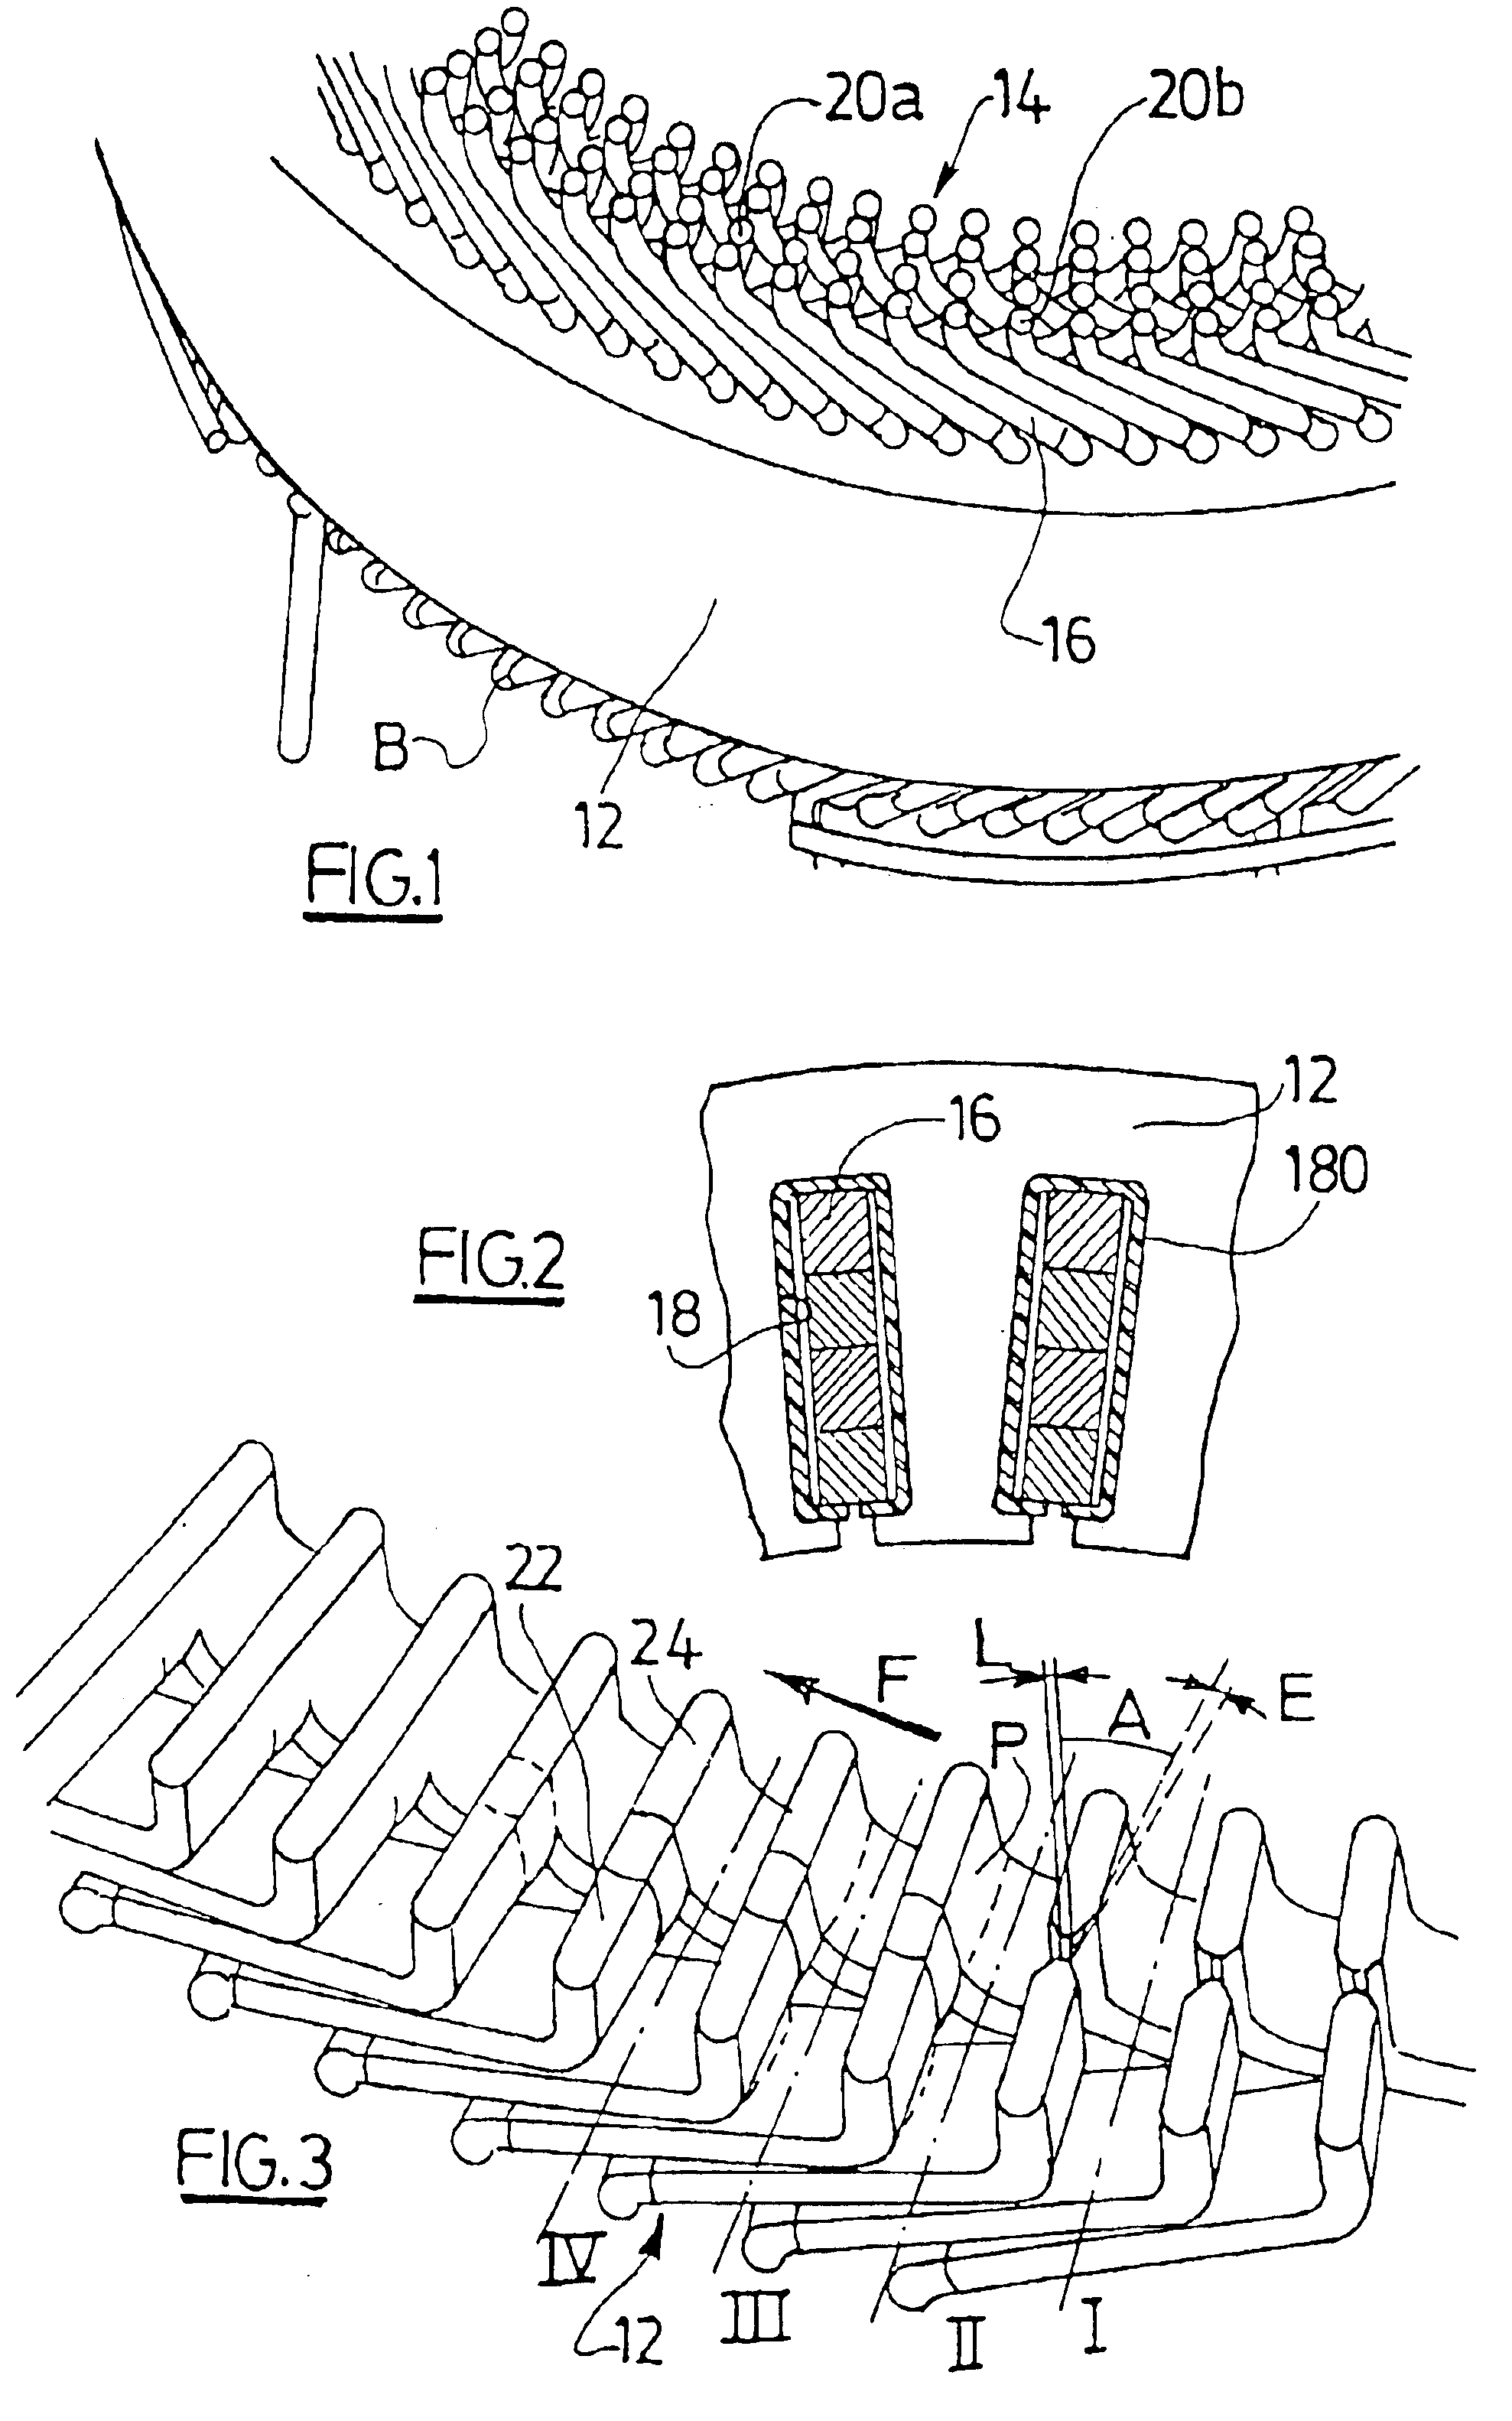 Method for assembling conductive segments of a rotor winding or stator winding in a rotary electric machine